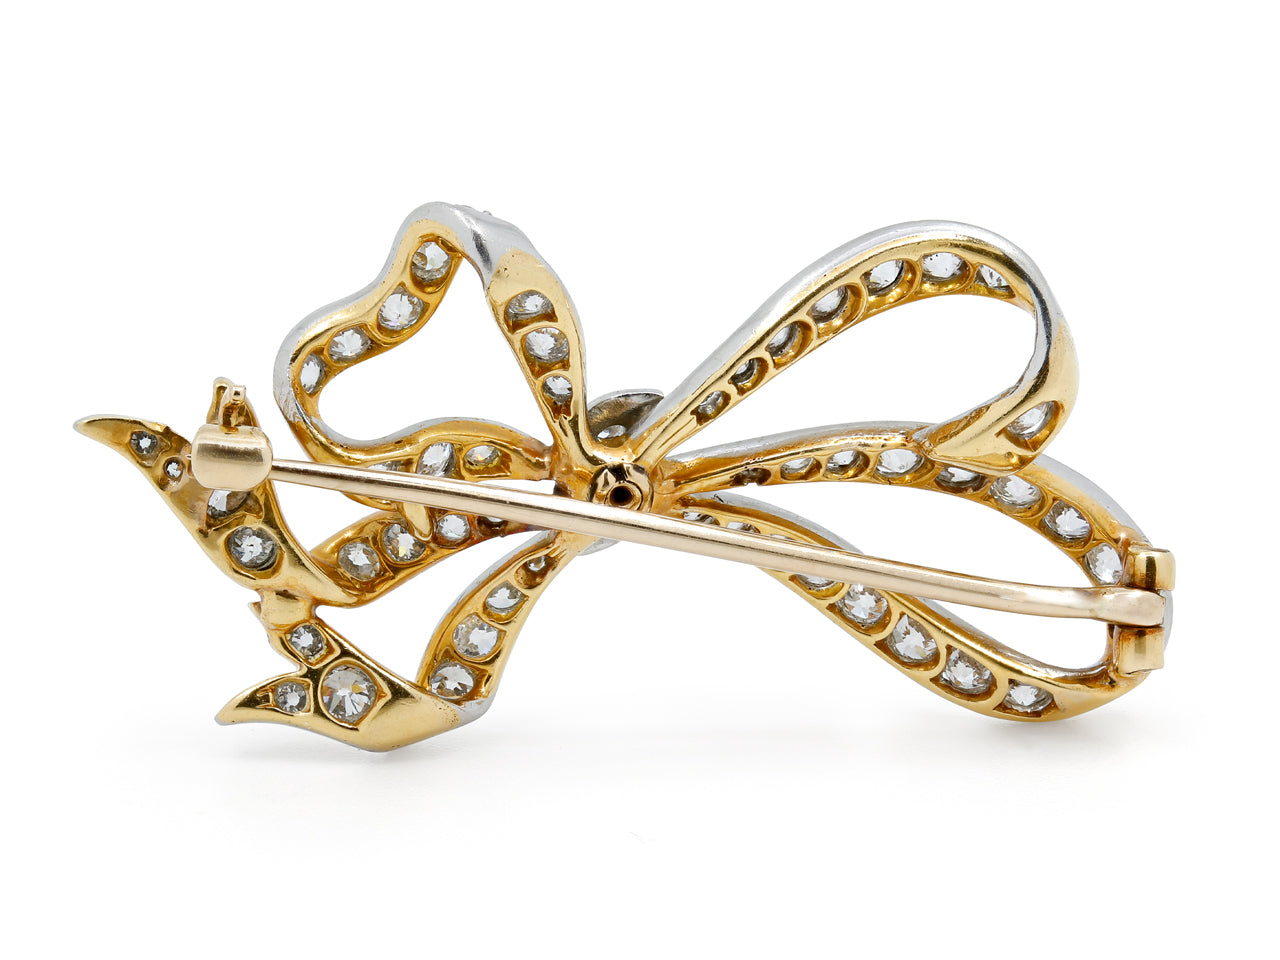 Antique Edwardian Diamond Bow Brooch in Platinum and 18K Gold